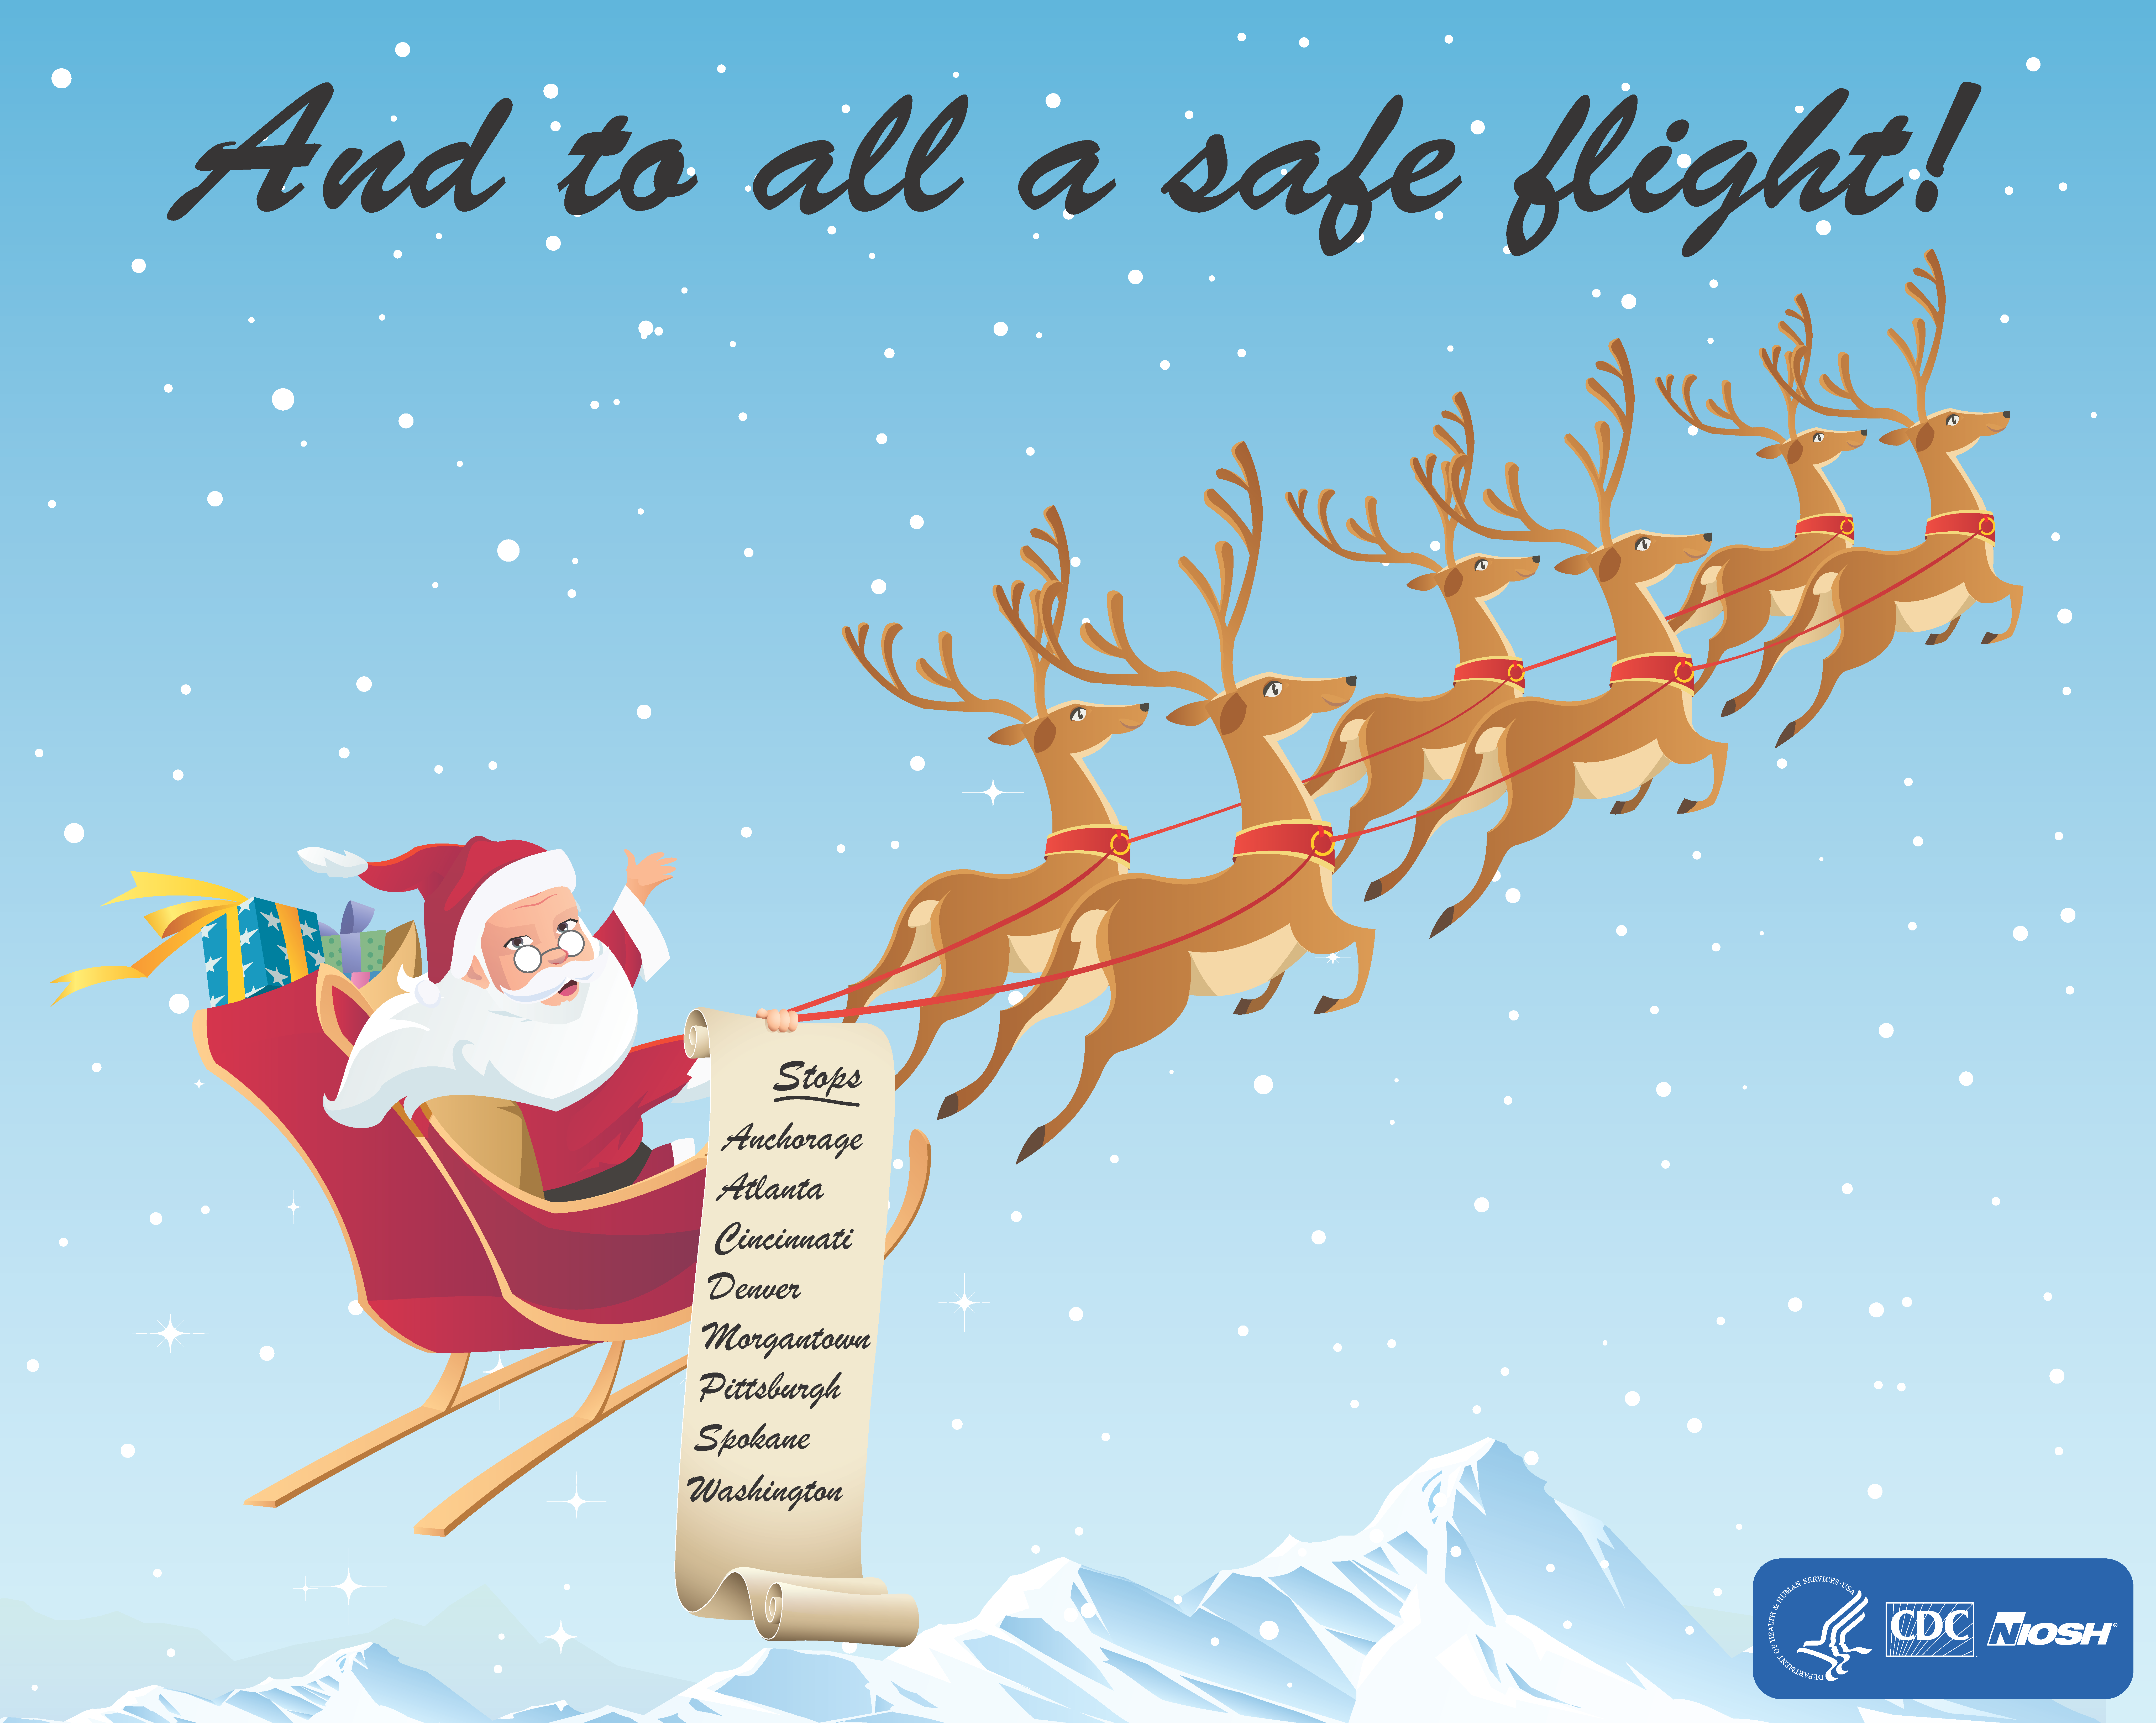 Santa flying in a sleigh. Text says and to all a safe flight